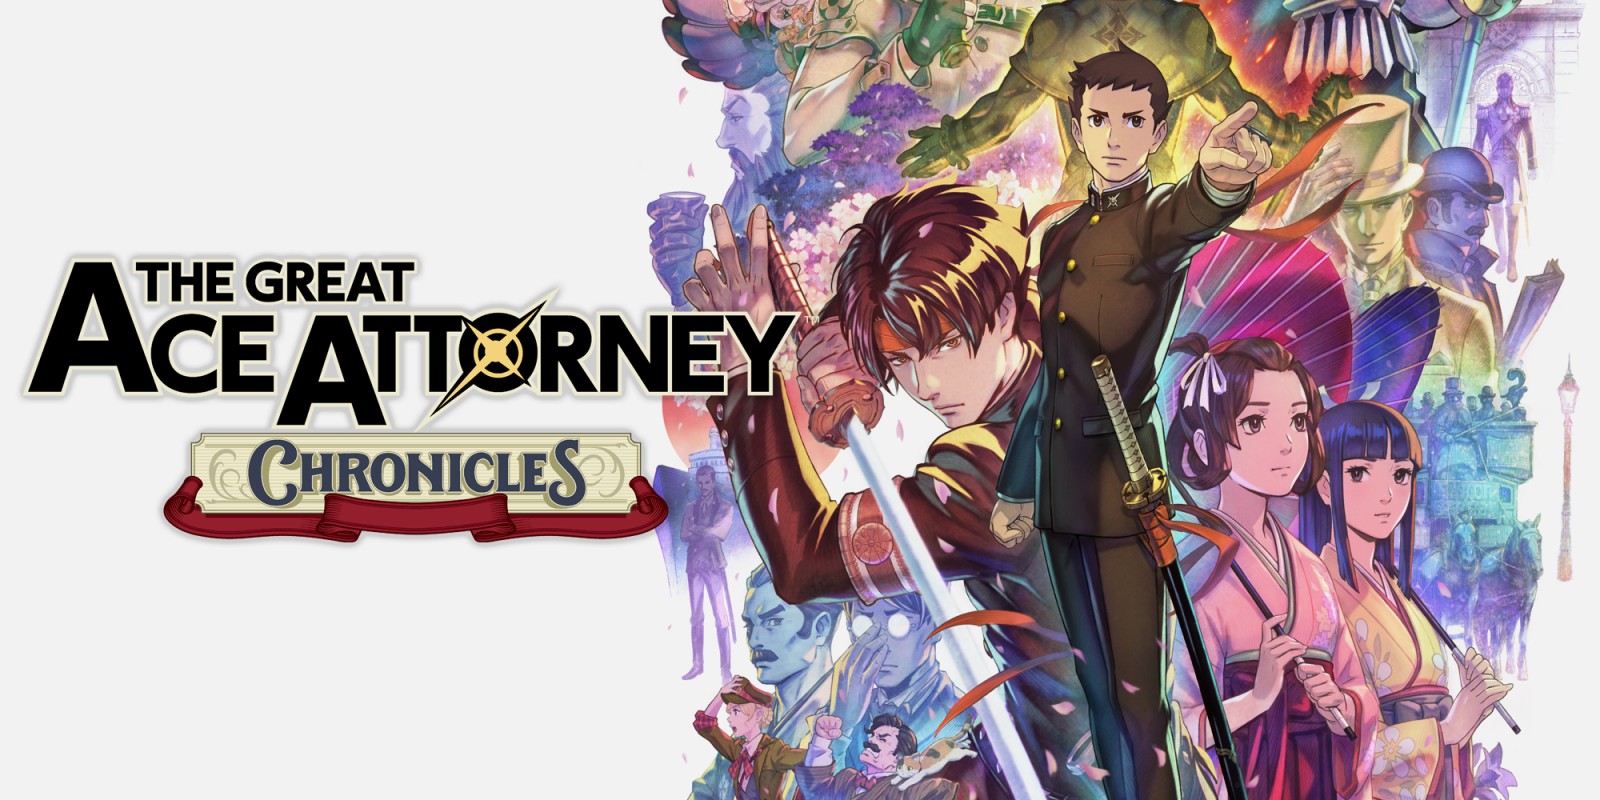 The Great Ace Attorney Chronicles | Steam Gift RU